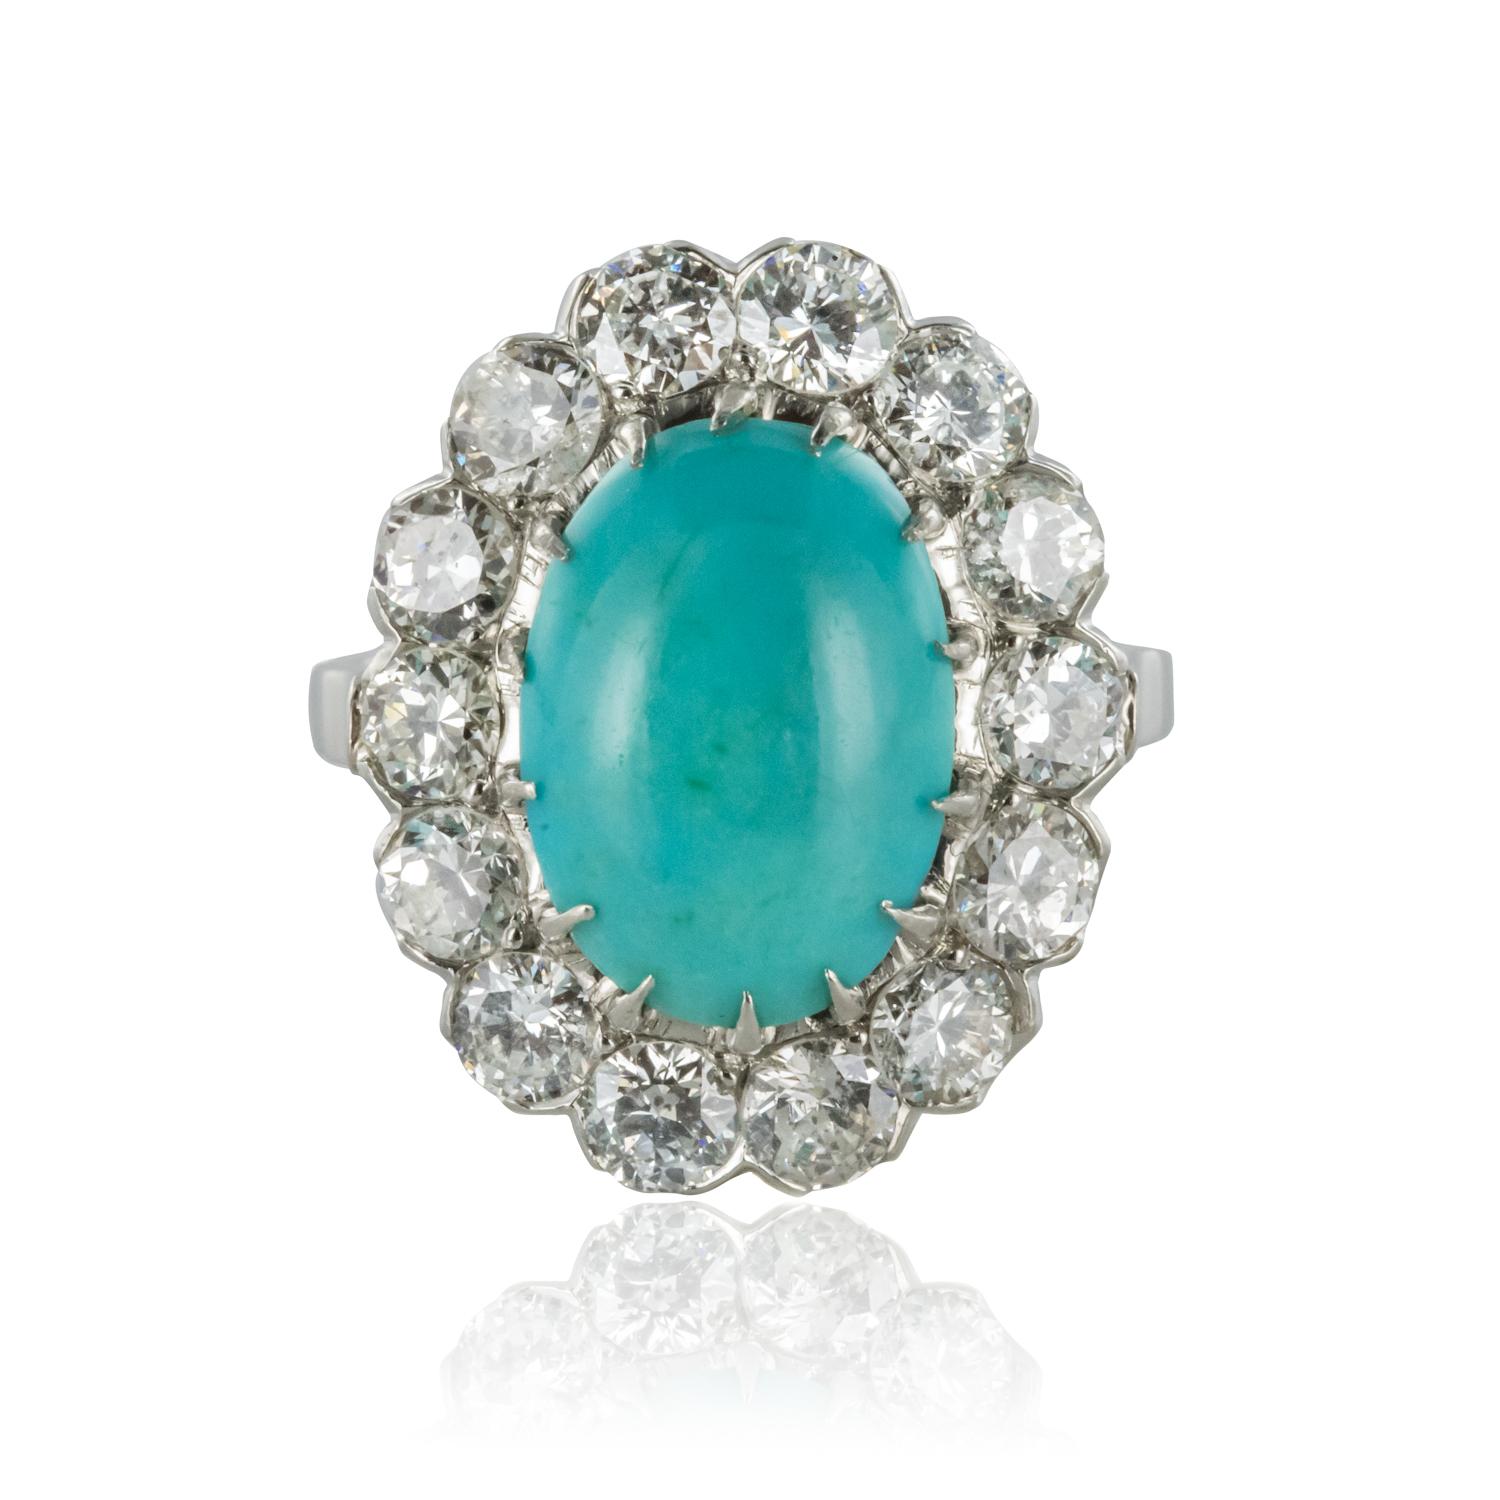 Ring in 18 karats white gold, owl hallmark and platinum mascaron hallmark.
Important daisy ring, it is set with claws in the center of a cabochon turquoise in an entourage of 14 brilliant-cut diamonds. The basket is perforated to let light come in